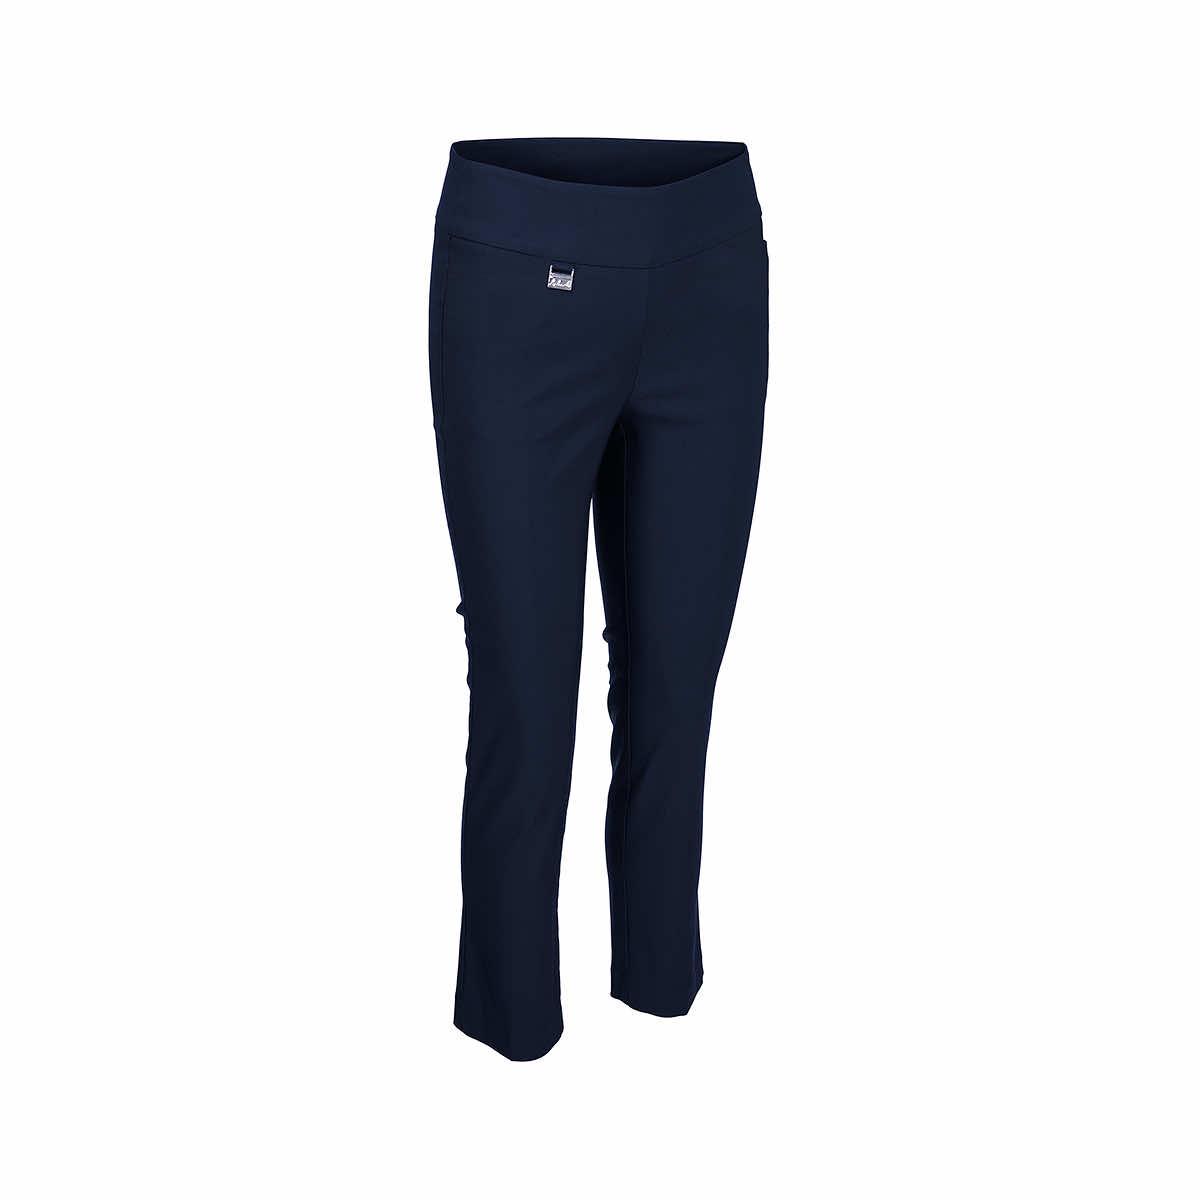 Women's Pull On-On Stretch Time and True Millennium Pants Straight